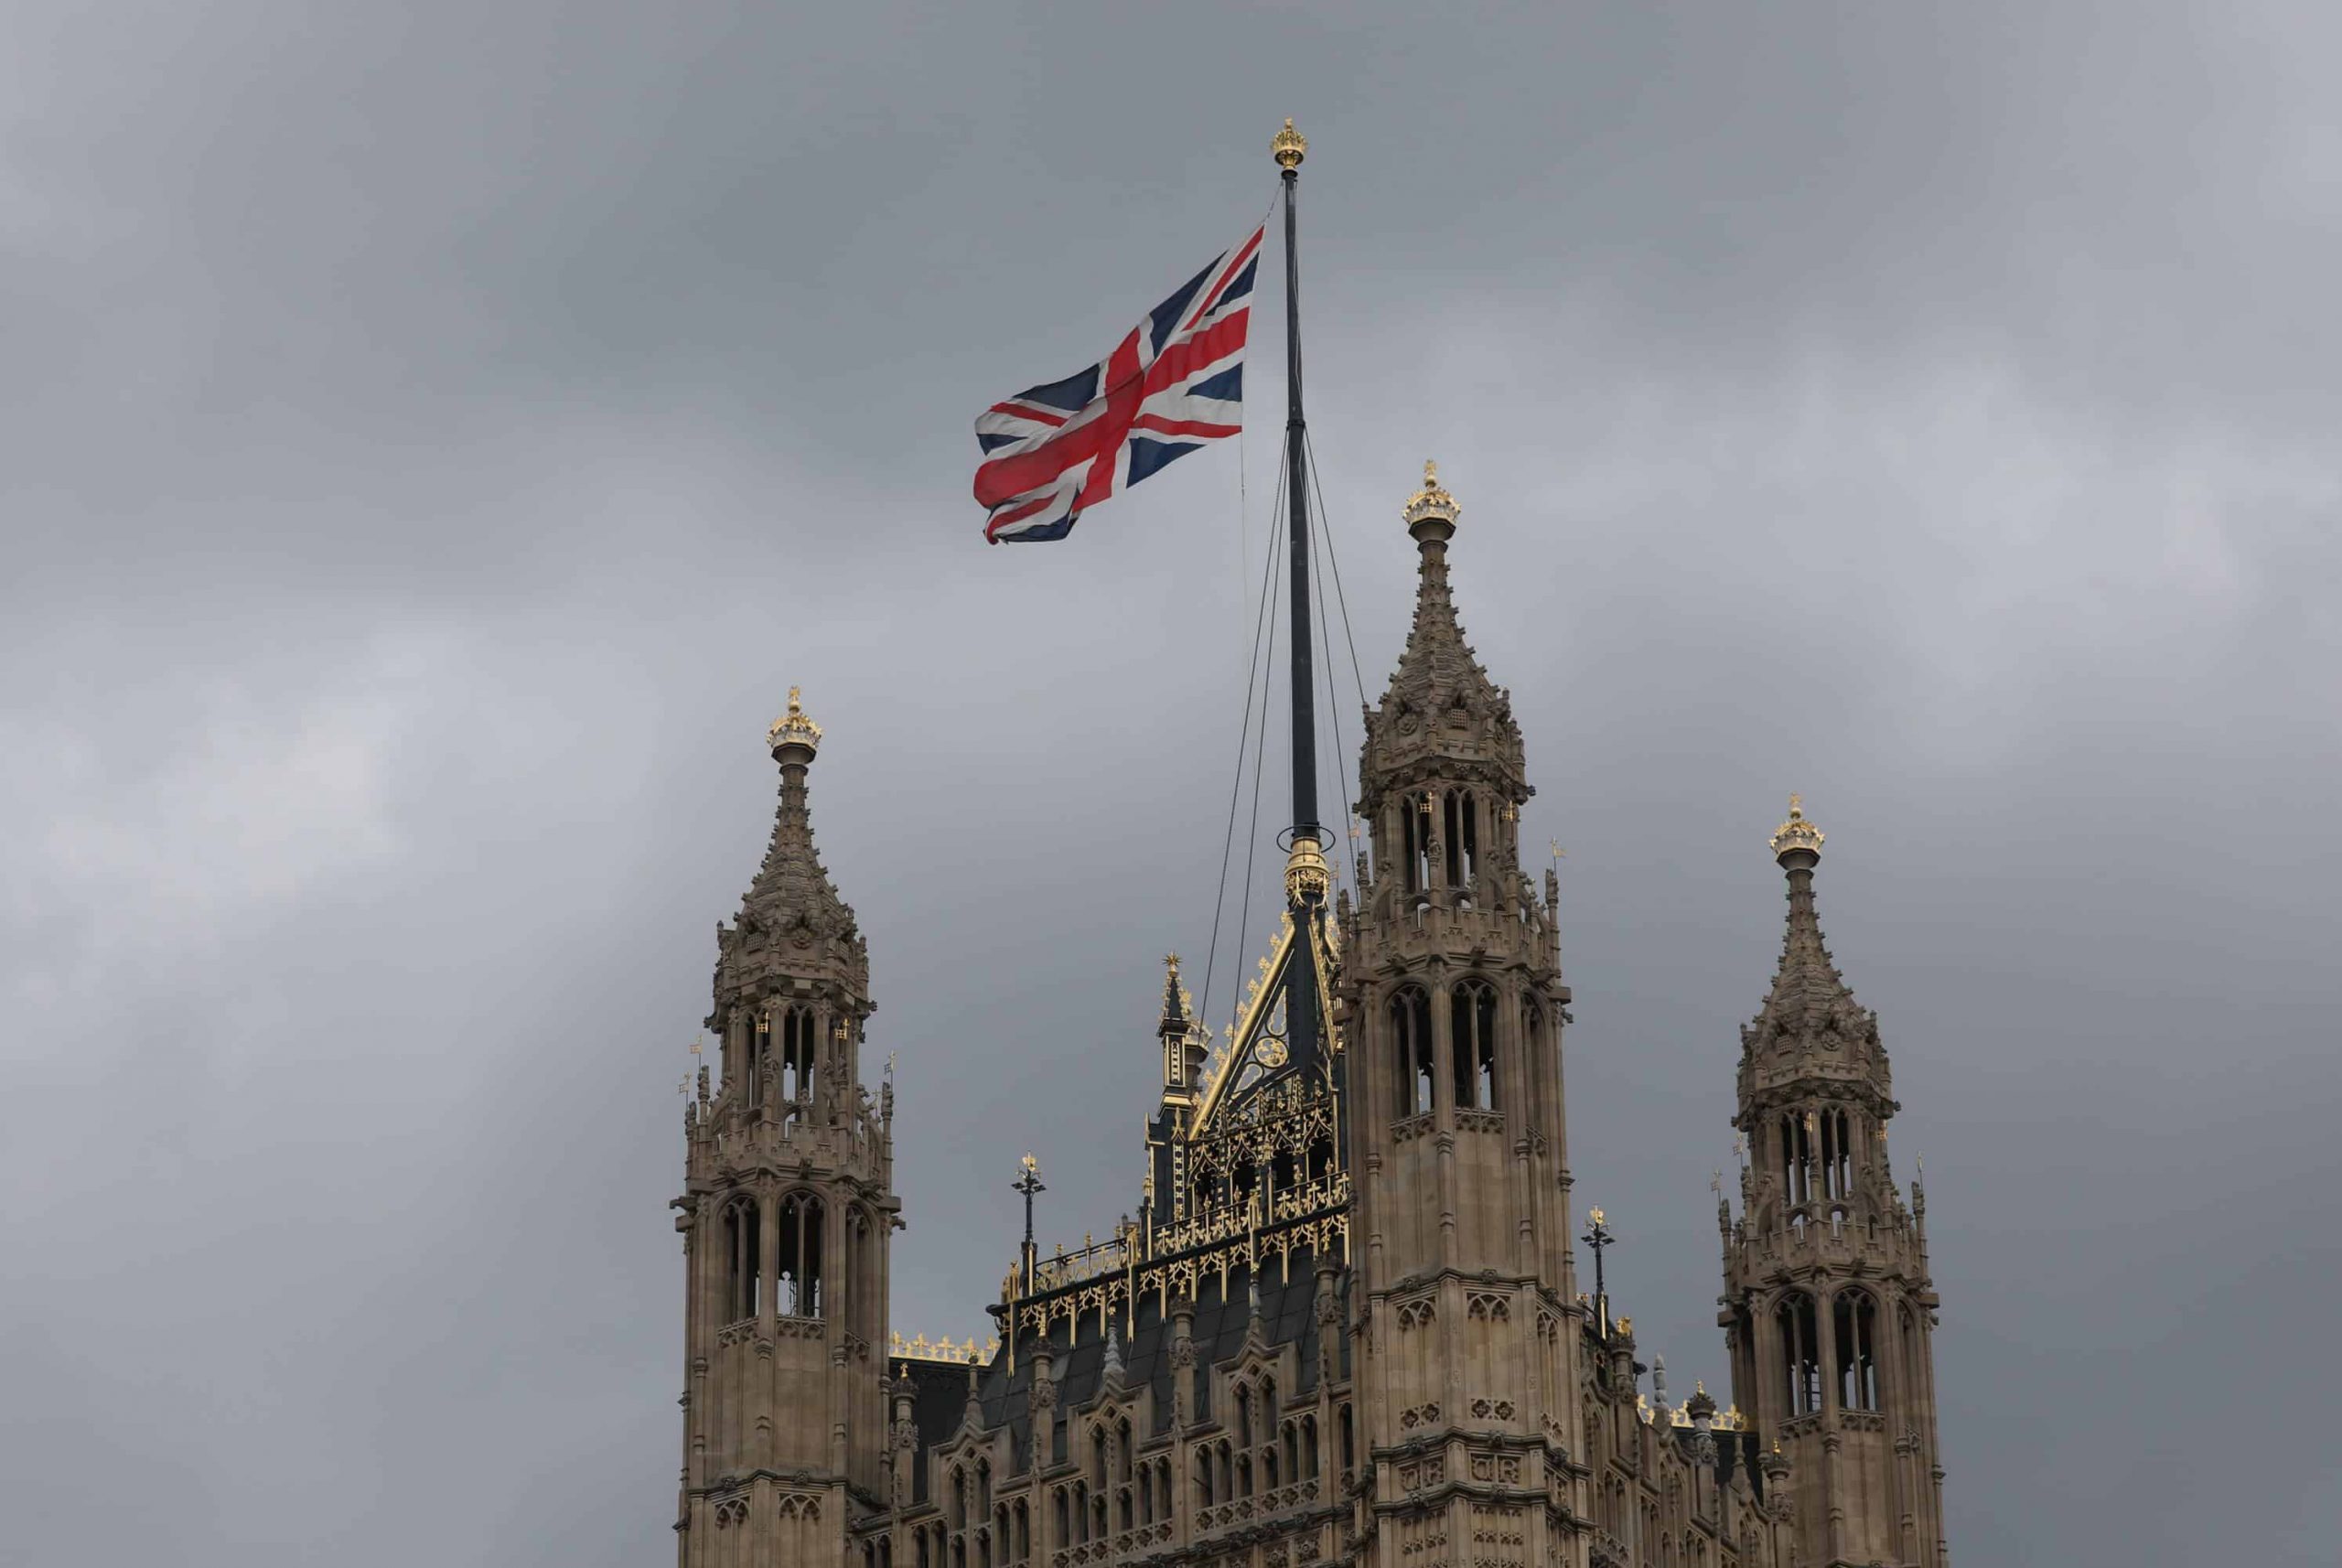 MP calls for Union flag to be flown from public buildings to mark Brexit